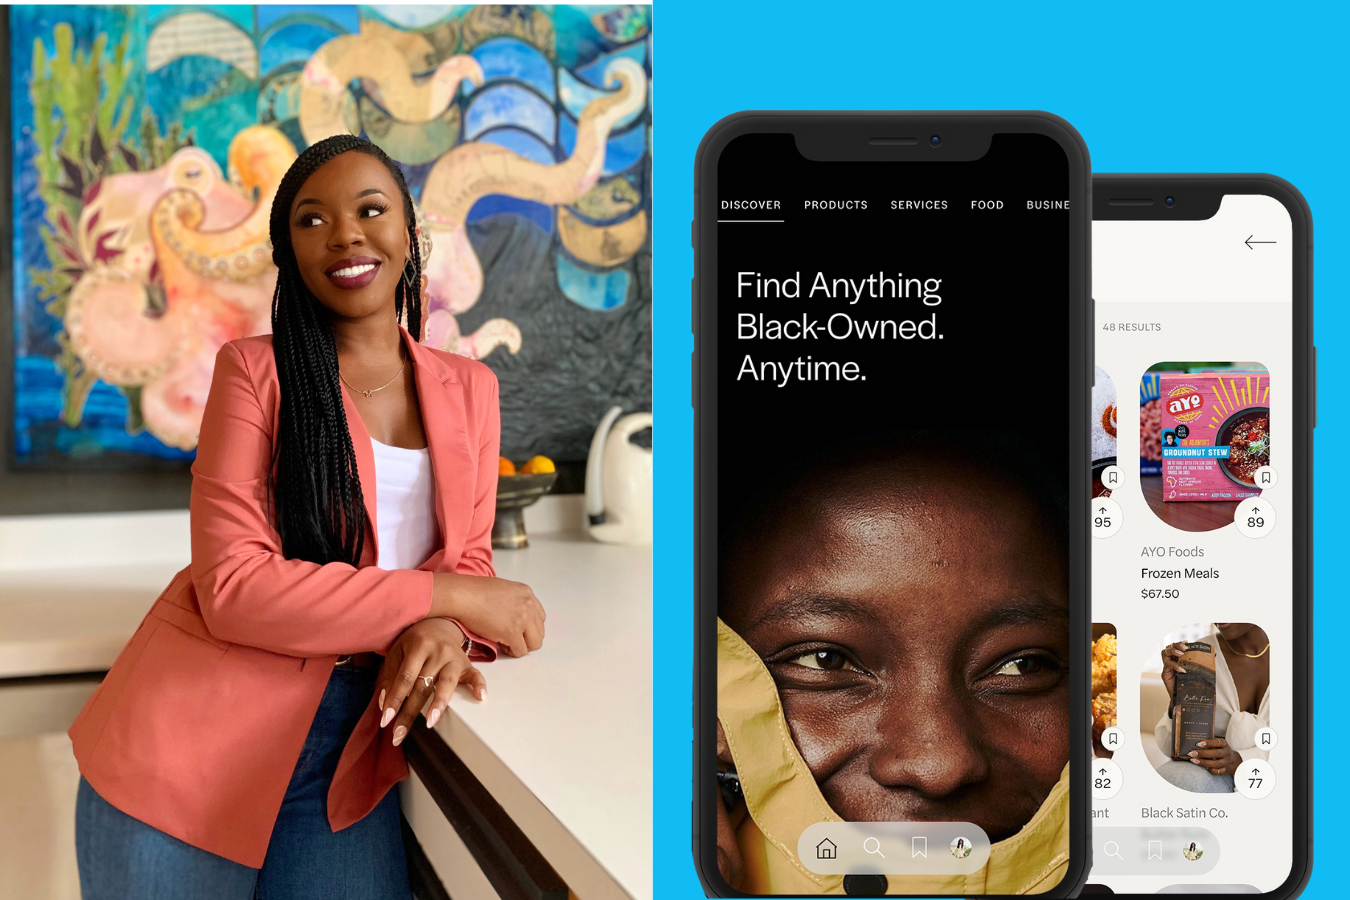 This Woman Launched The #1 Discovery App for Black-Owned Businesses